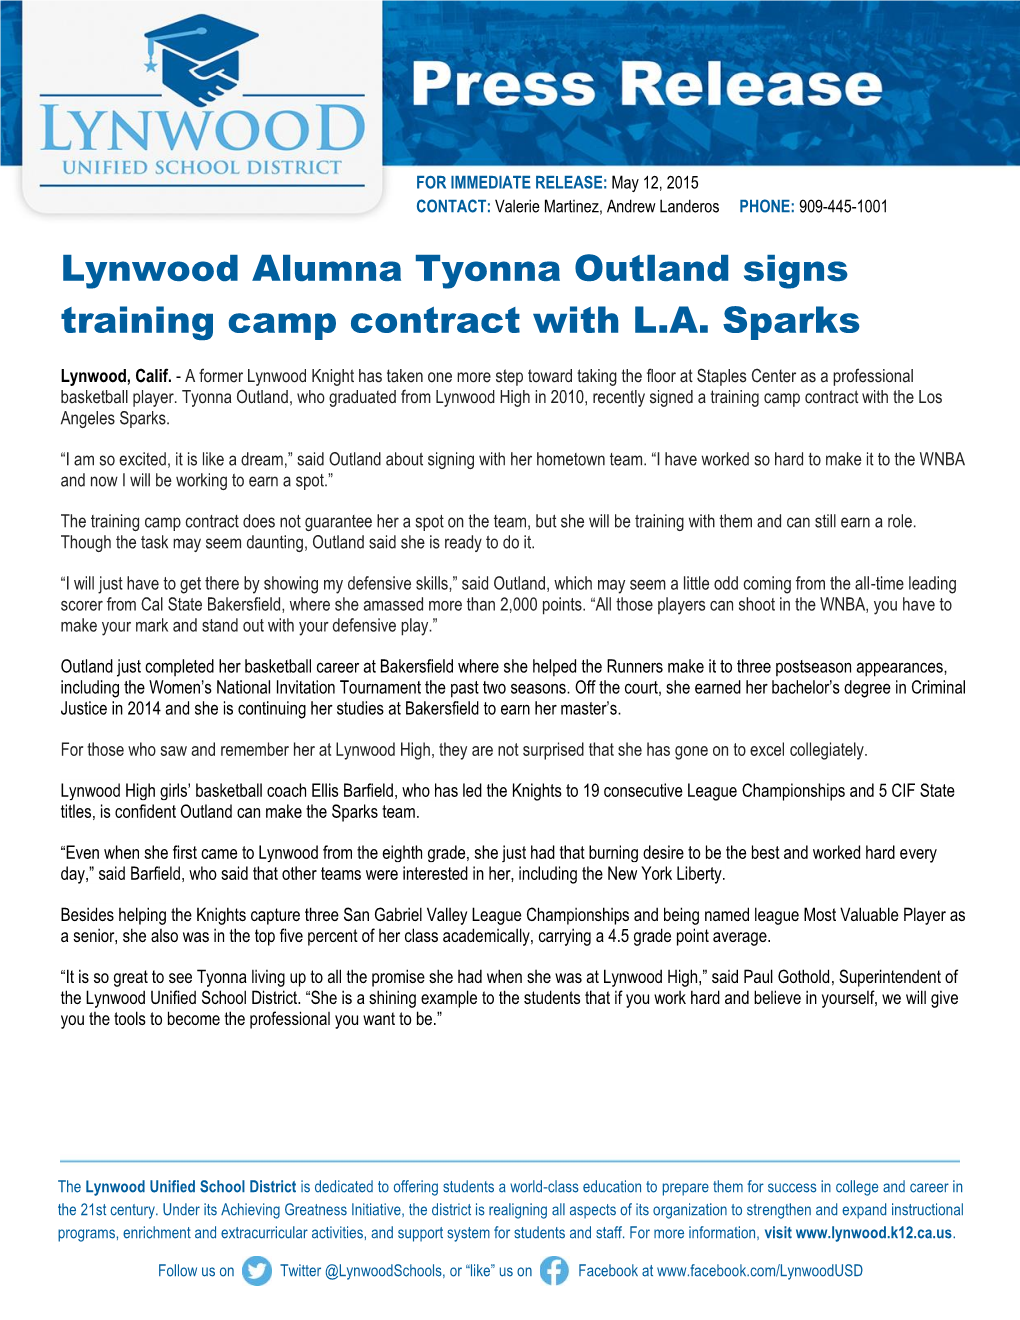 Lynwood Alumna Tyonna Outland Signs Training Camp Contract with L.A